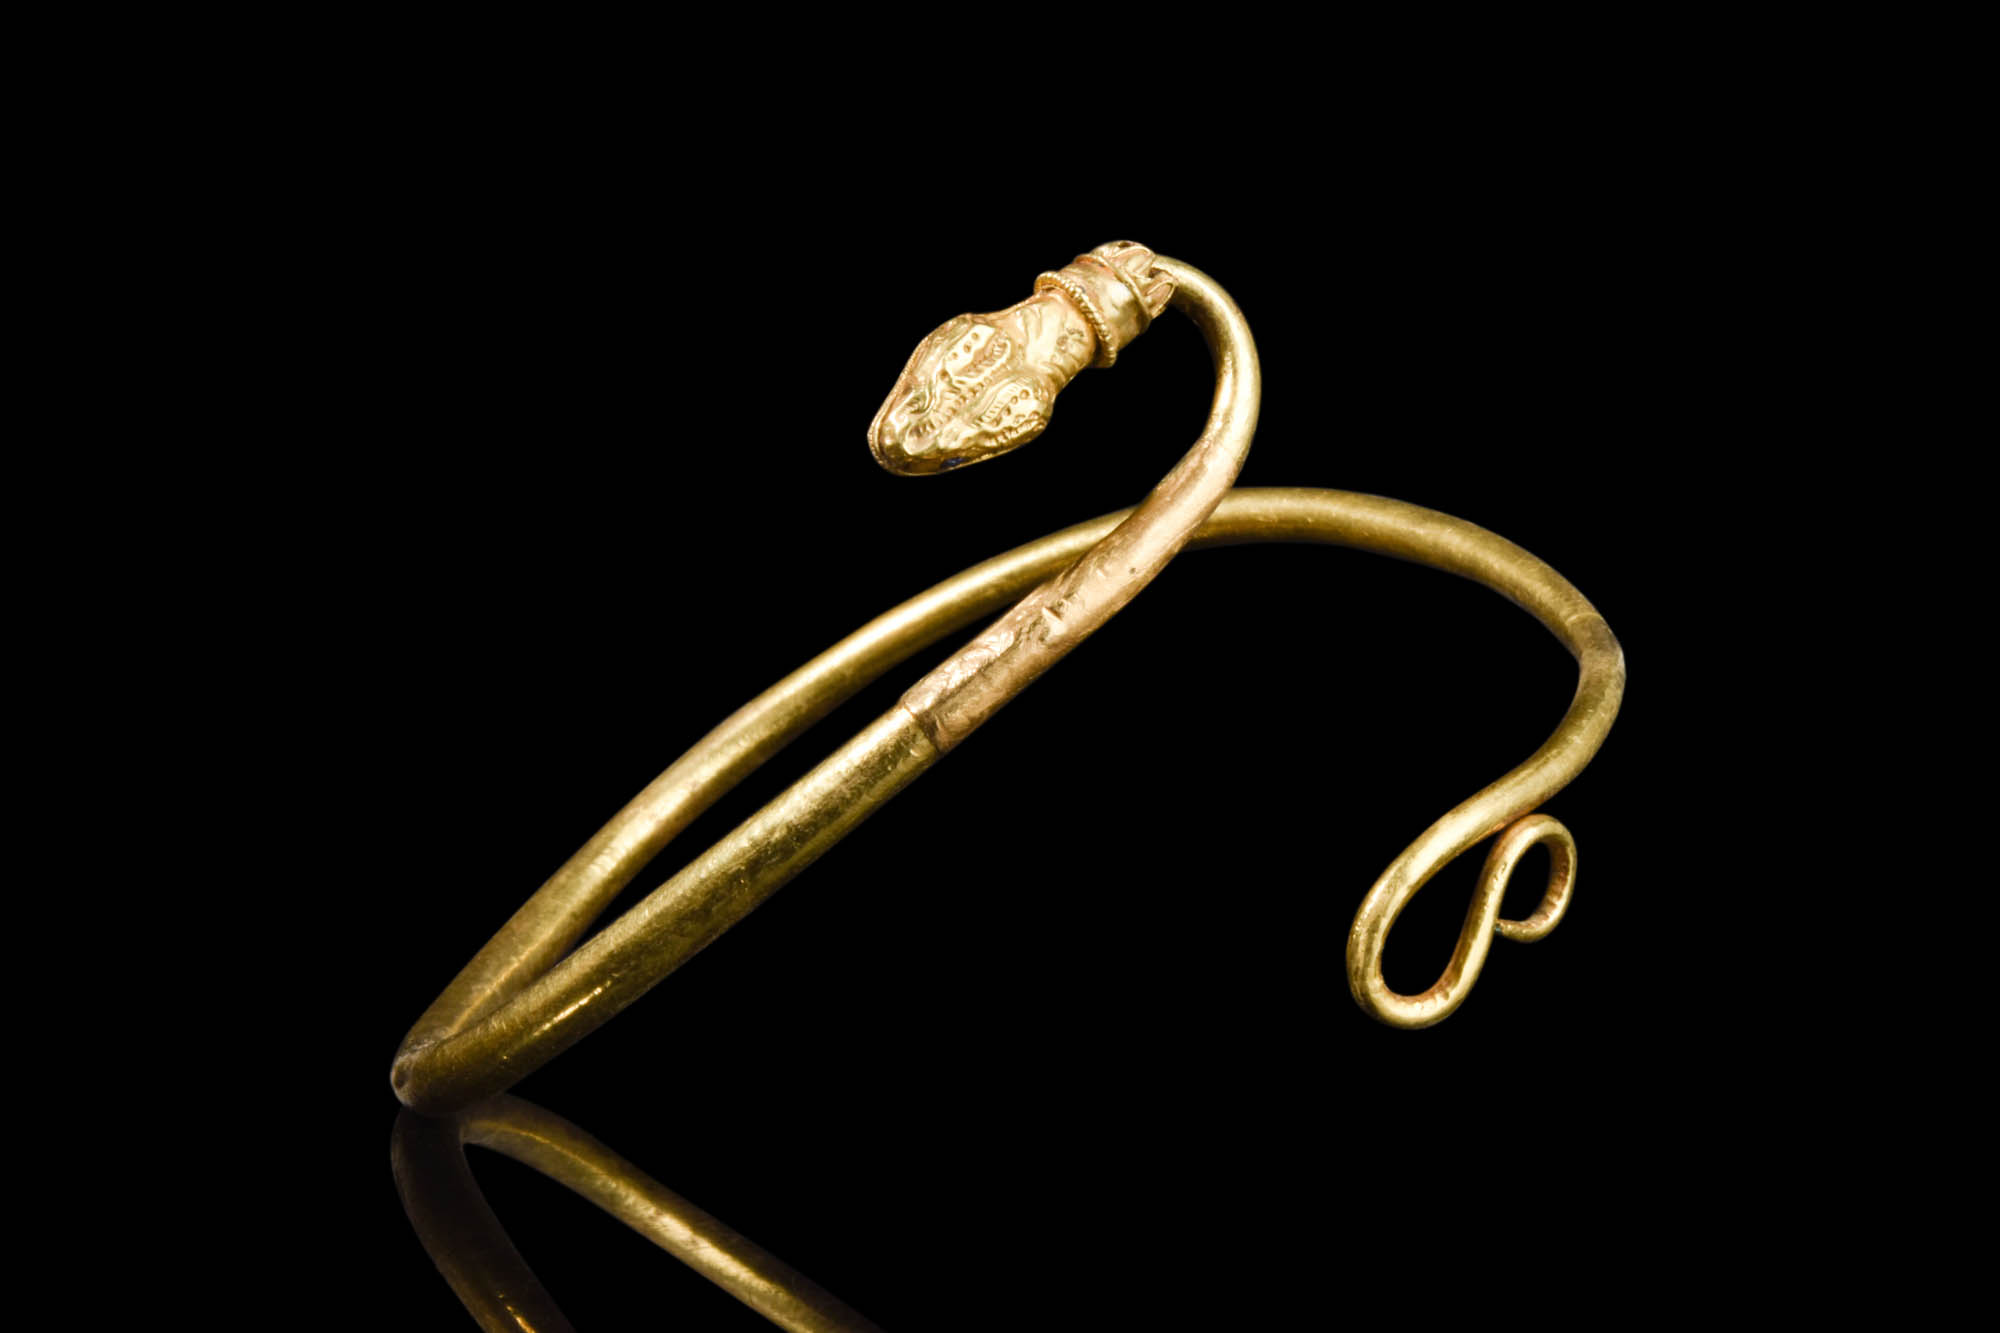 HEAVY PTOLEMAIC GOLD ARM RING - Image 4 of 5